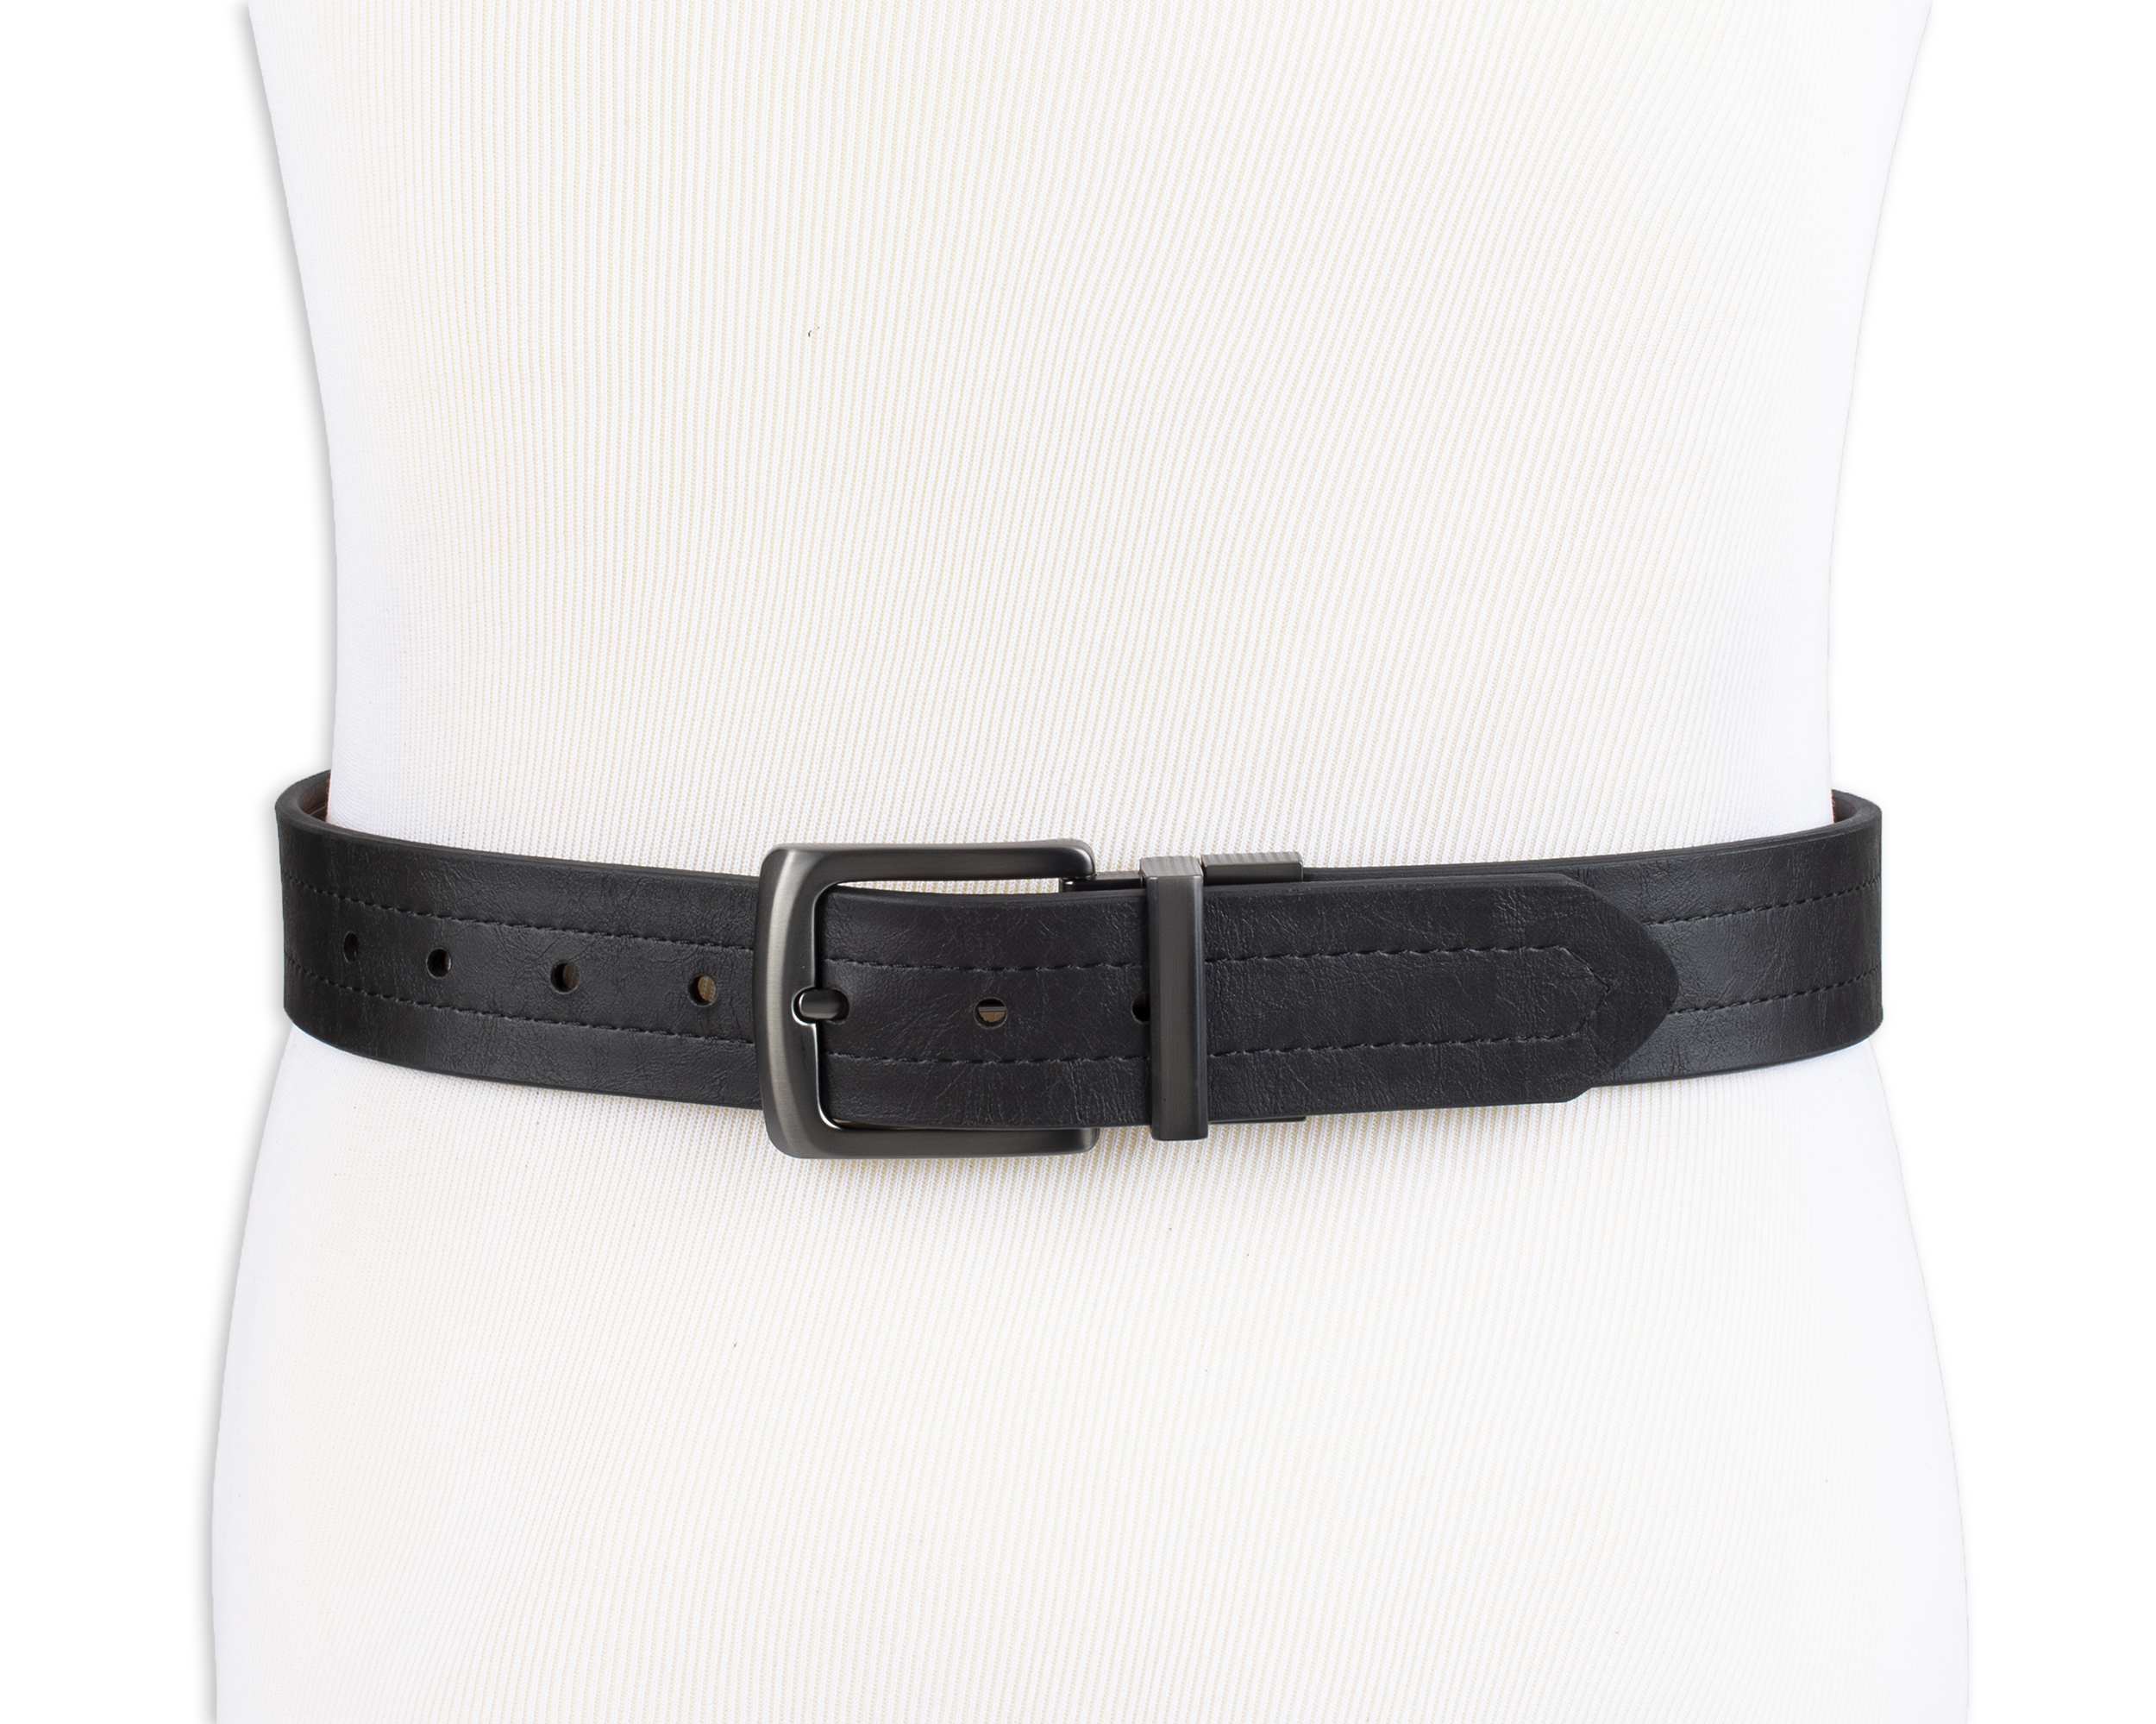 Levi's Men's Two-in-One Reversible Casual Belt, Brown/Black - image 3 of 8